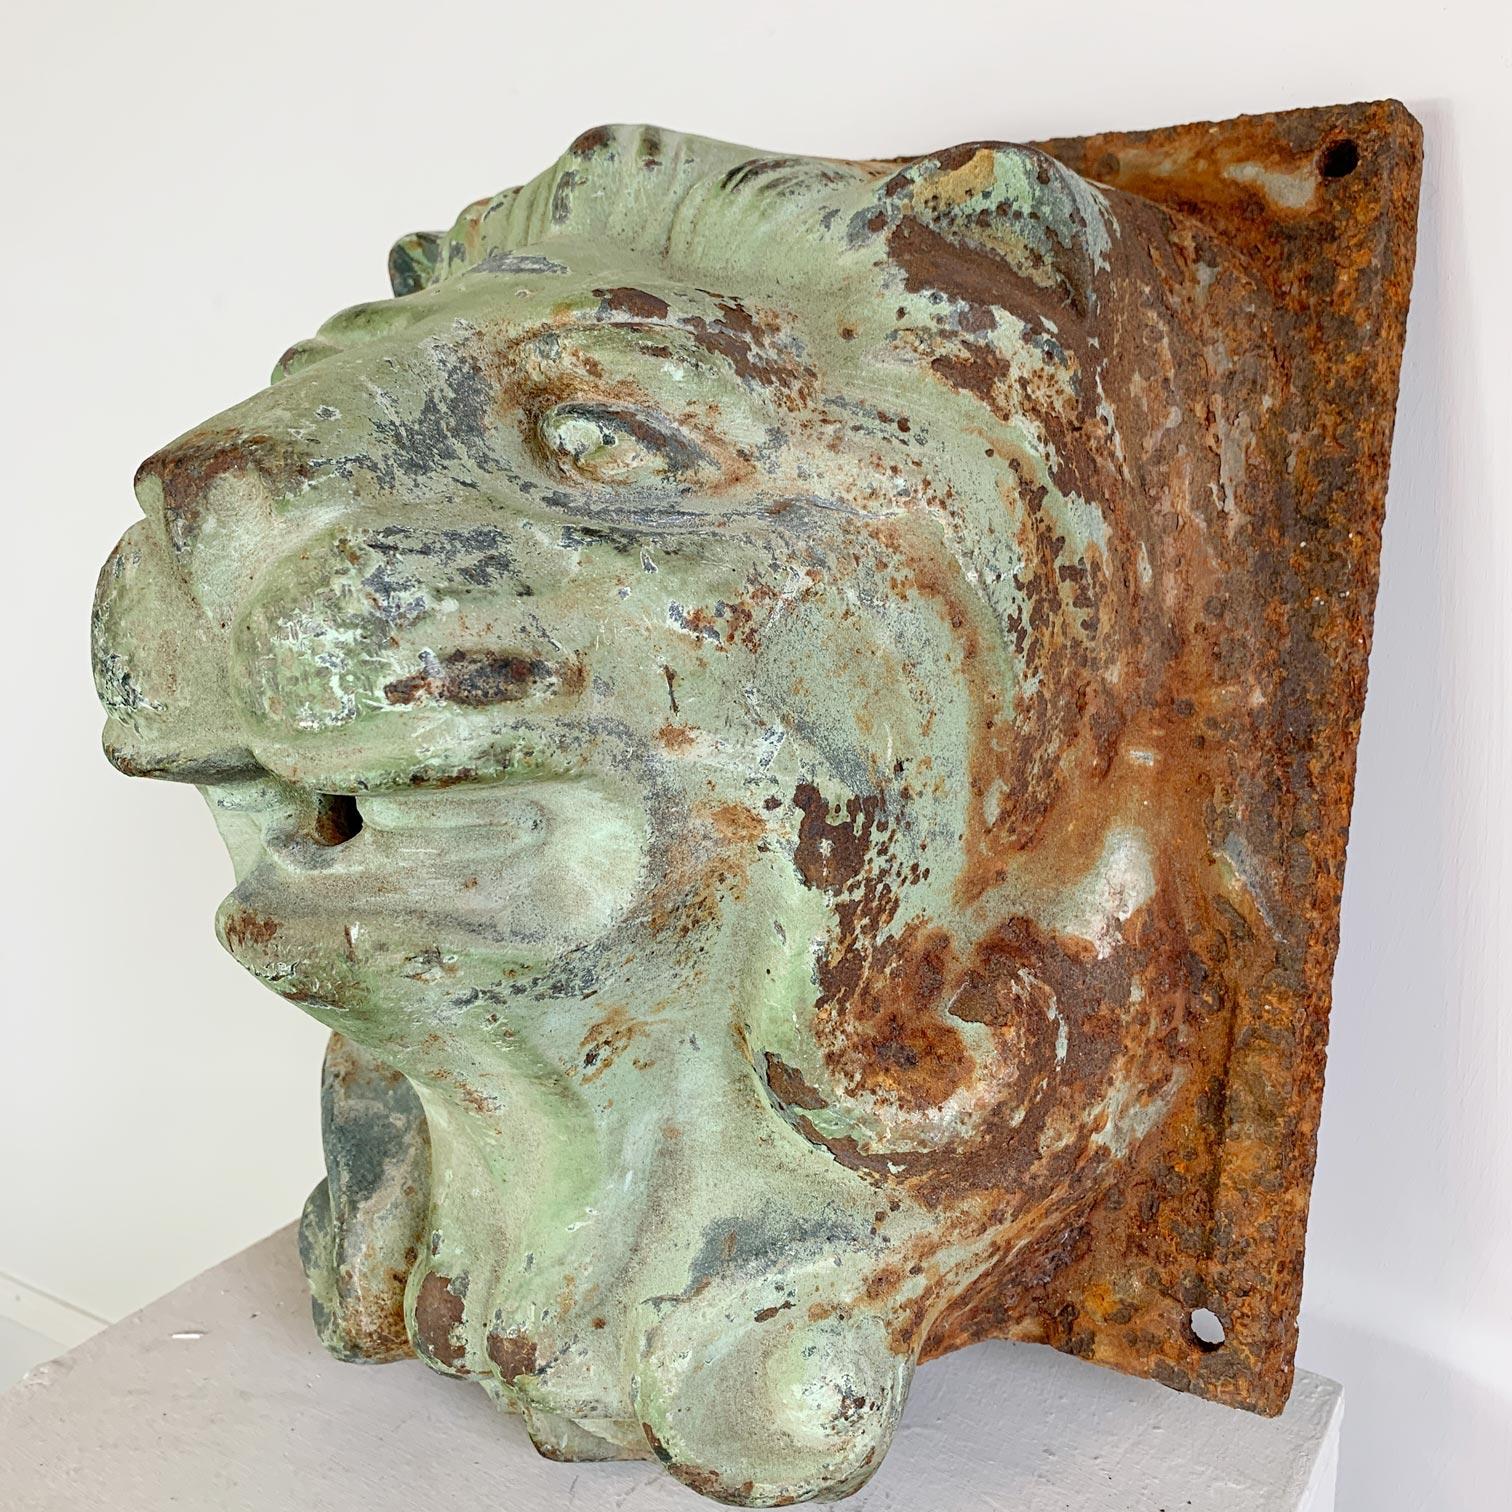 Dating to the latter 19th century this cast iron French wall mounted water feature is wonderfully detailed, the green paint, aged over the decades is sublime. All four fixing points are present and in good order

Measures: Height 29.5cm, Width